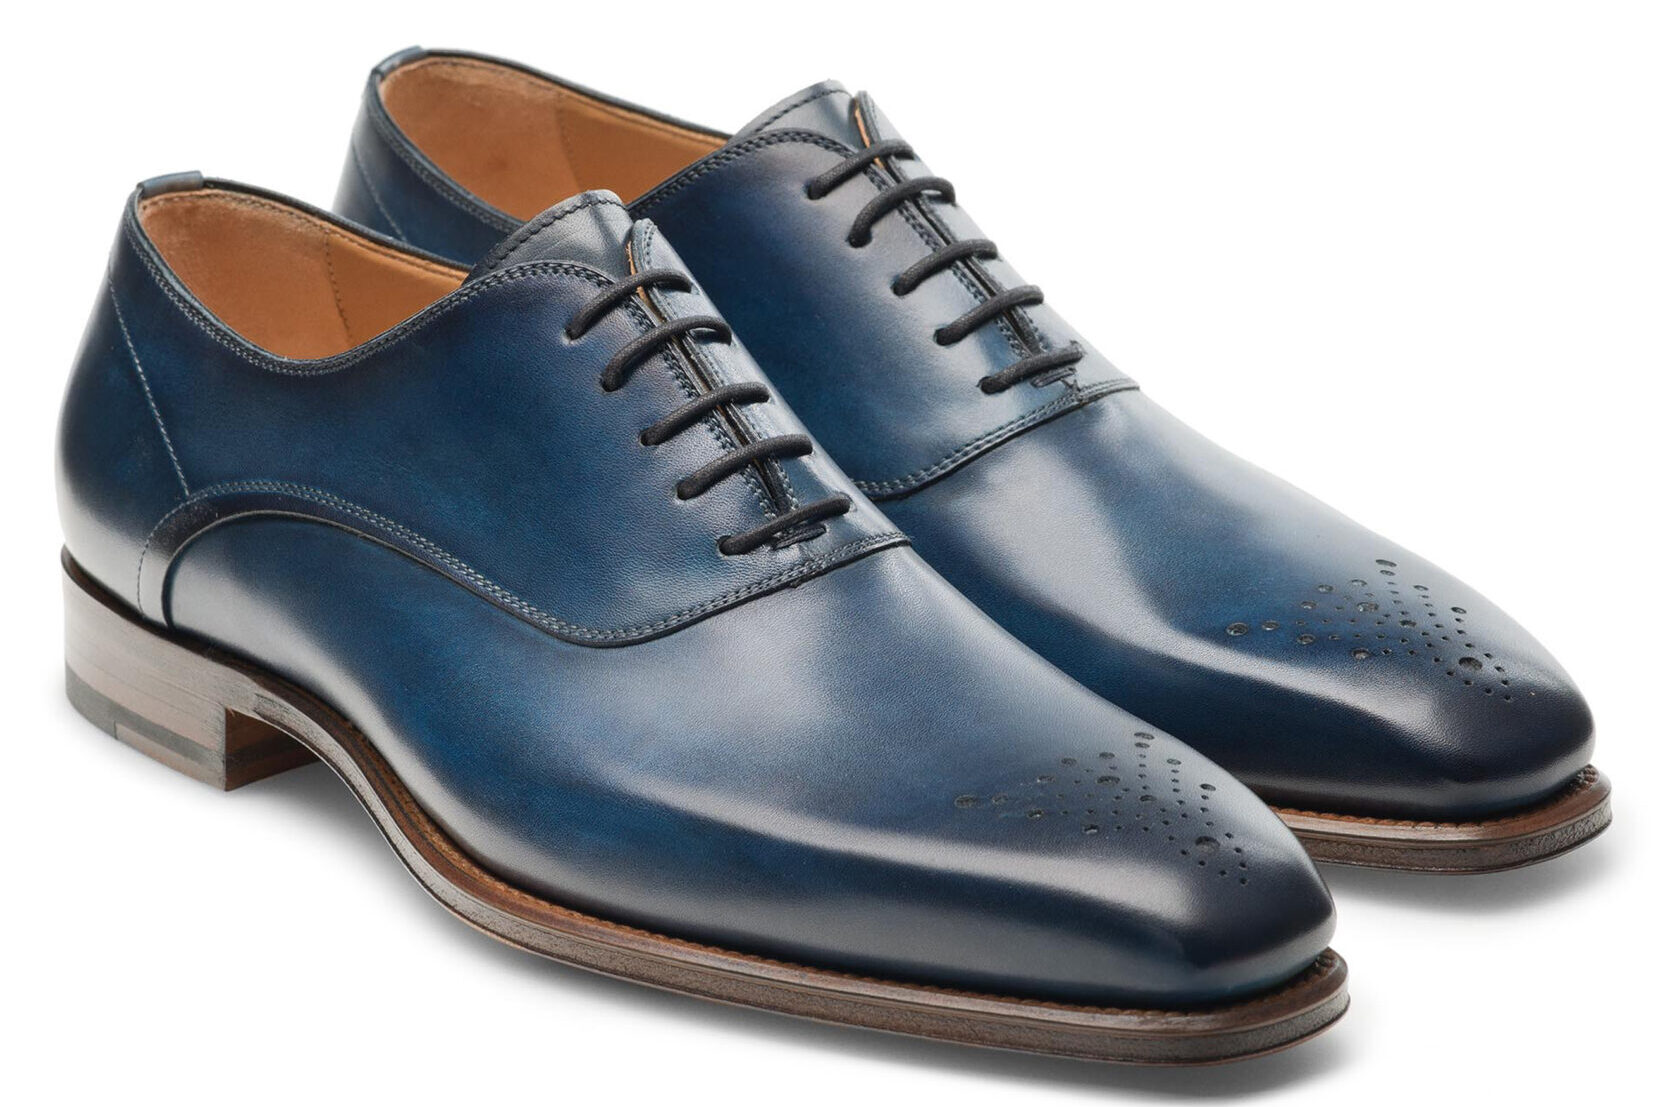 These blue shoes are a great wedding-related product for the groom.